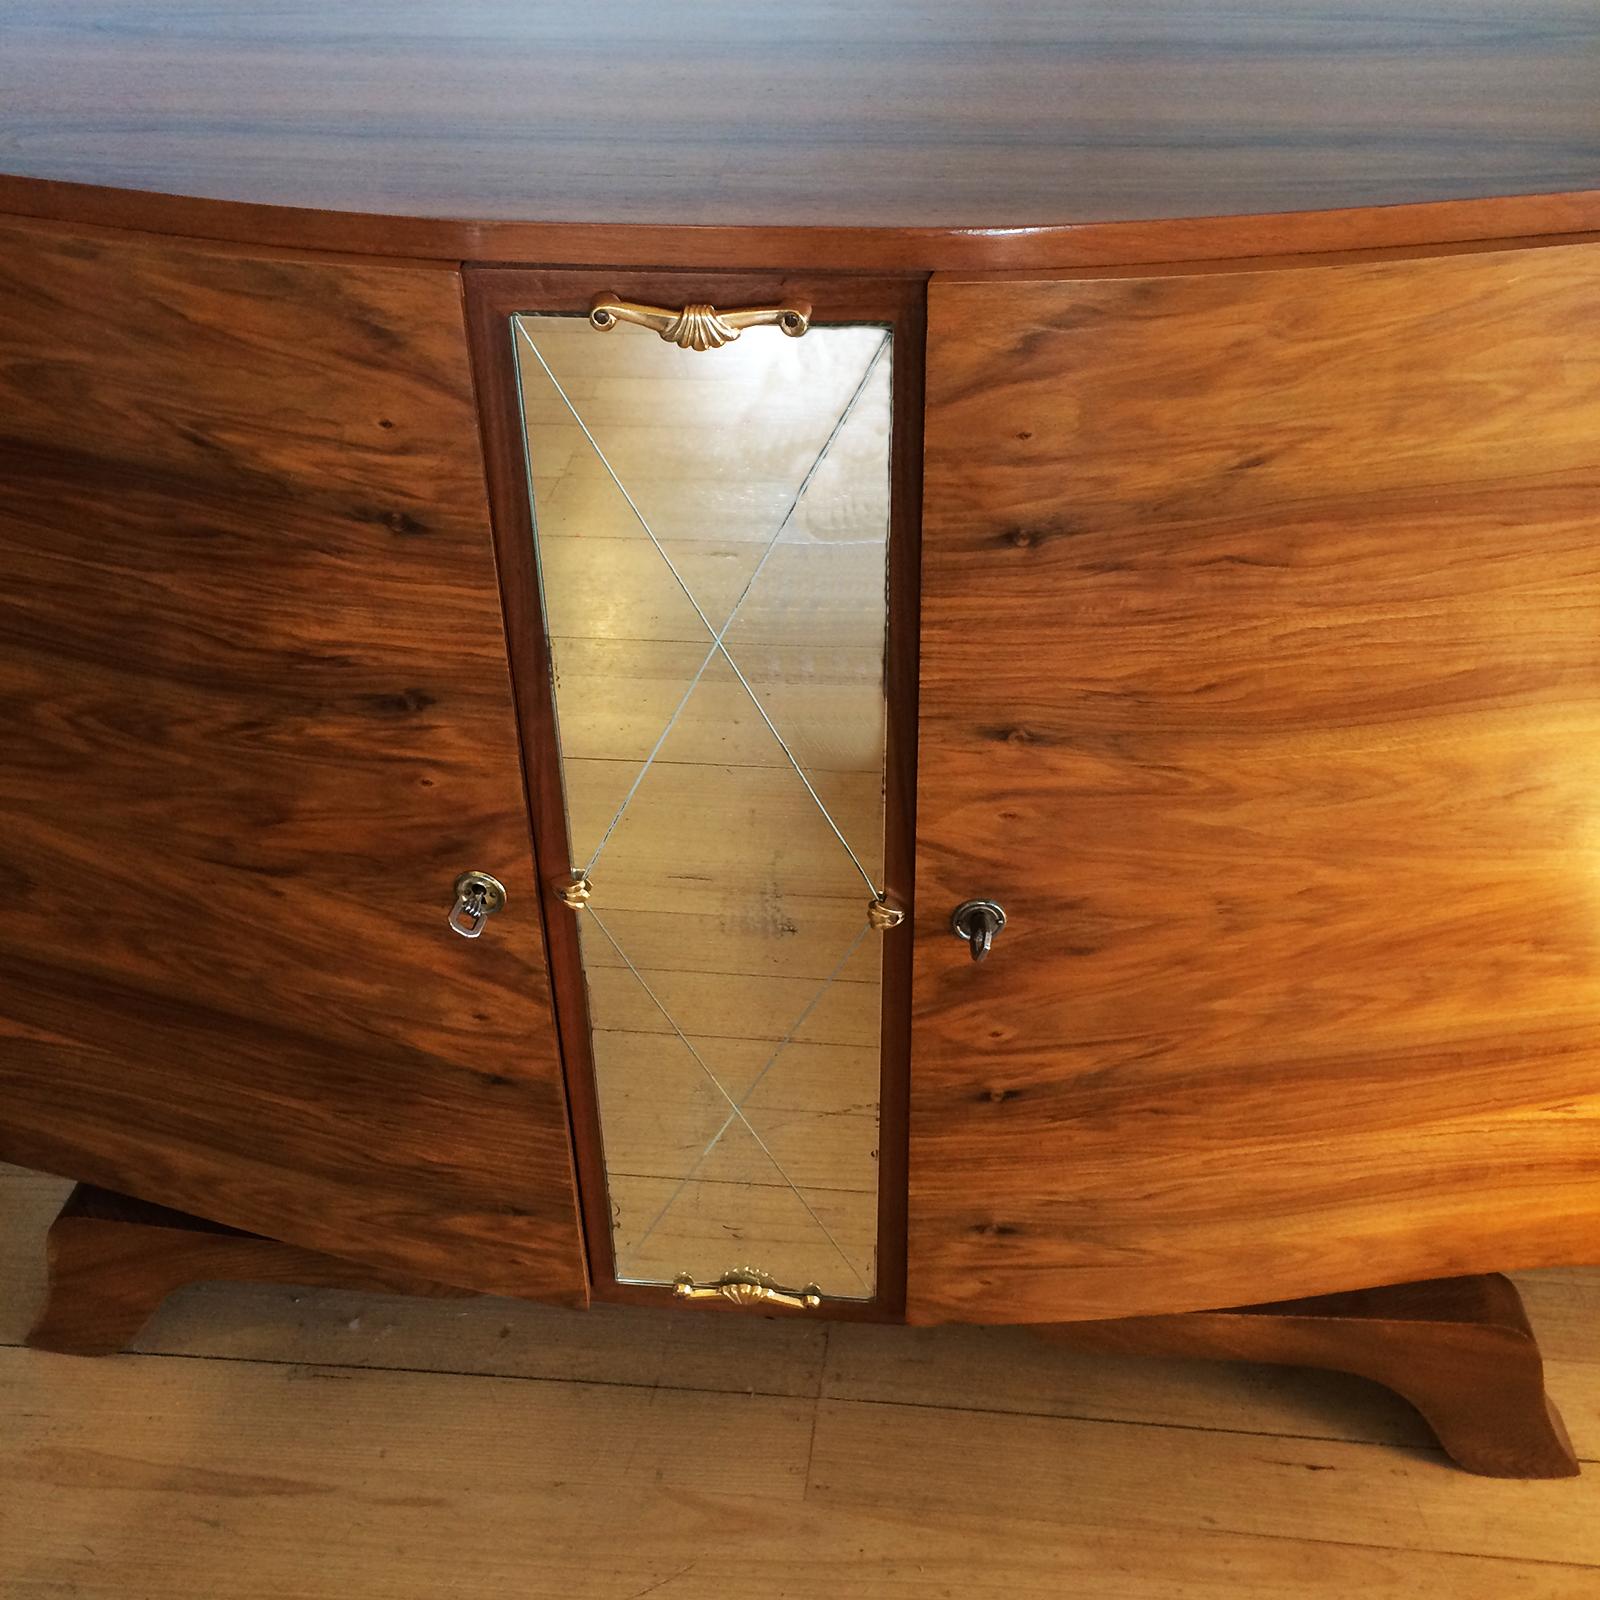 Art Deco sideboard central diamond cut mirror, and symmetrical veneered dark birch case. The mirror is mounted with ornate bronze sections top and bottom, with Bronze tabs at centre-points. The top has spectacular, rich walnut grain timber, mirror